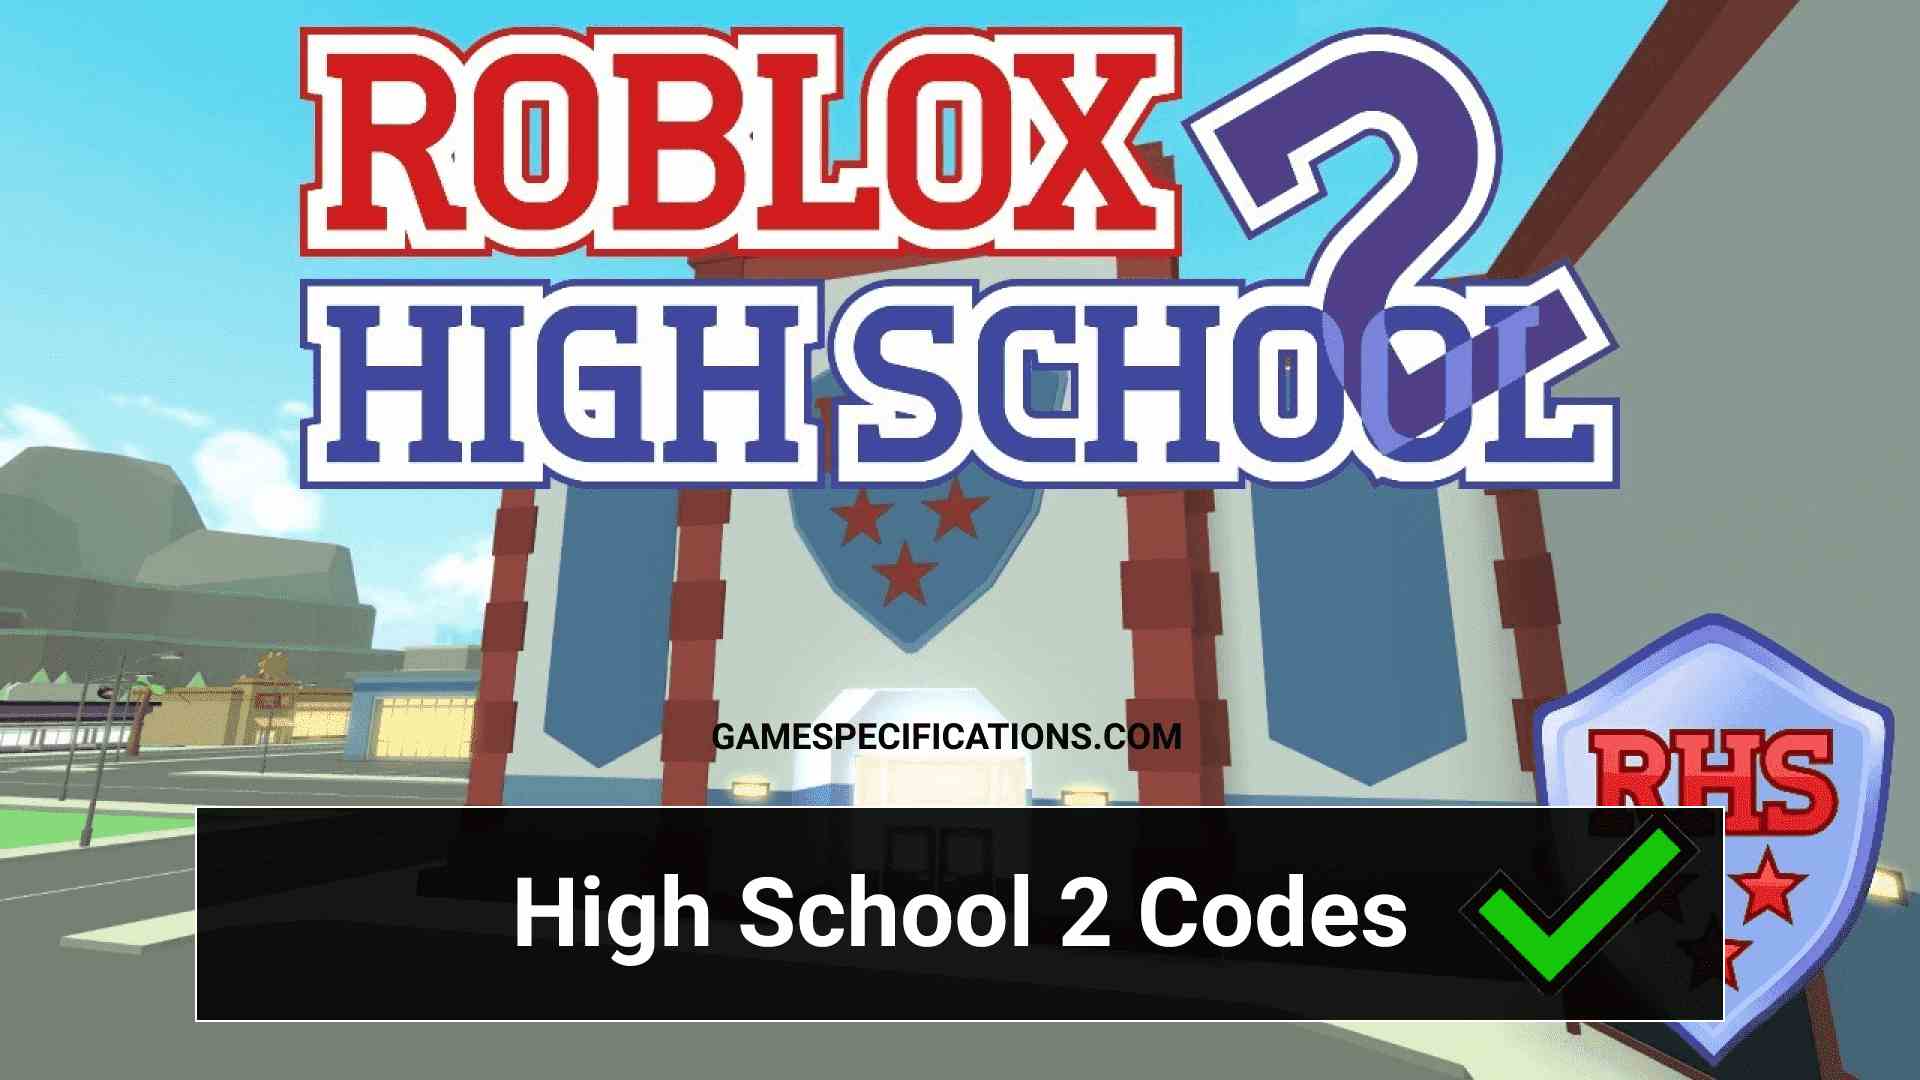 17 Working Roblox High School 2 Codes July 2021 Game Specifications - codes for boys roblox hight school